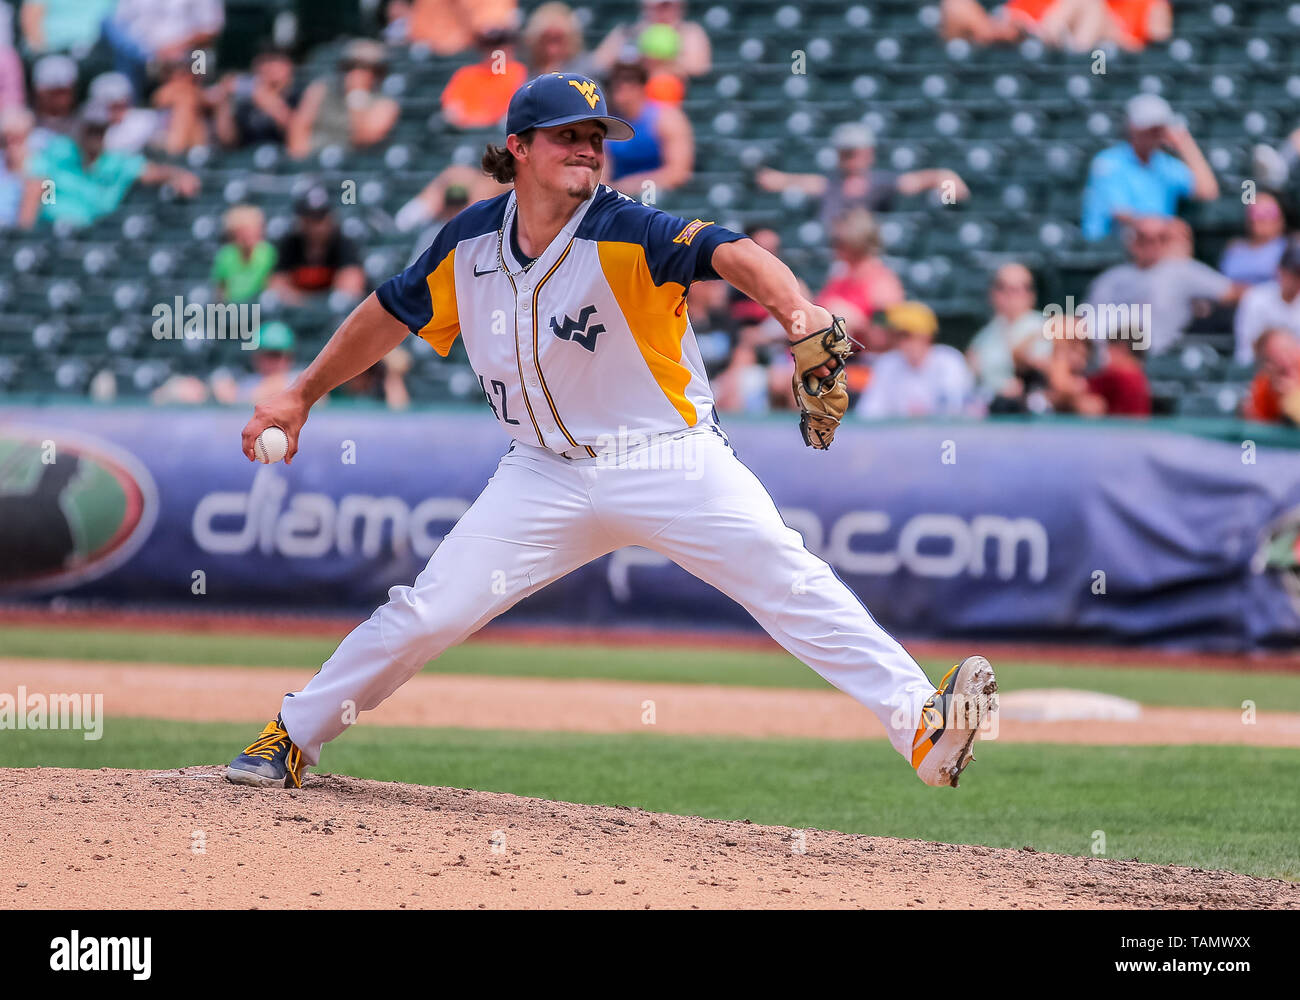 Oklahoma City, OK, USA. 25th May, 2019. West Virginia pitcher Sam Kessler (42) delivers a pitch during the 2019 Phillips 66 Big 12 Baseball Championship game between the West Virginia Mountaineers and the Oklahoma State Cowboys at Chickasaw Bricktown Ballpark in Oklahoma City, OK. Gray Siegel/CSM/Alamy Live News Stock Photo